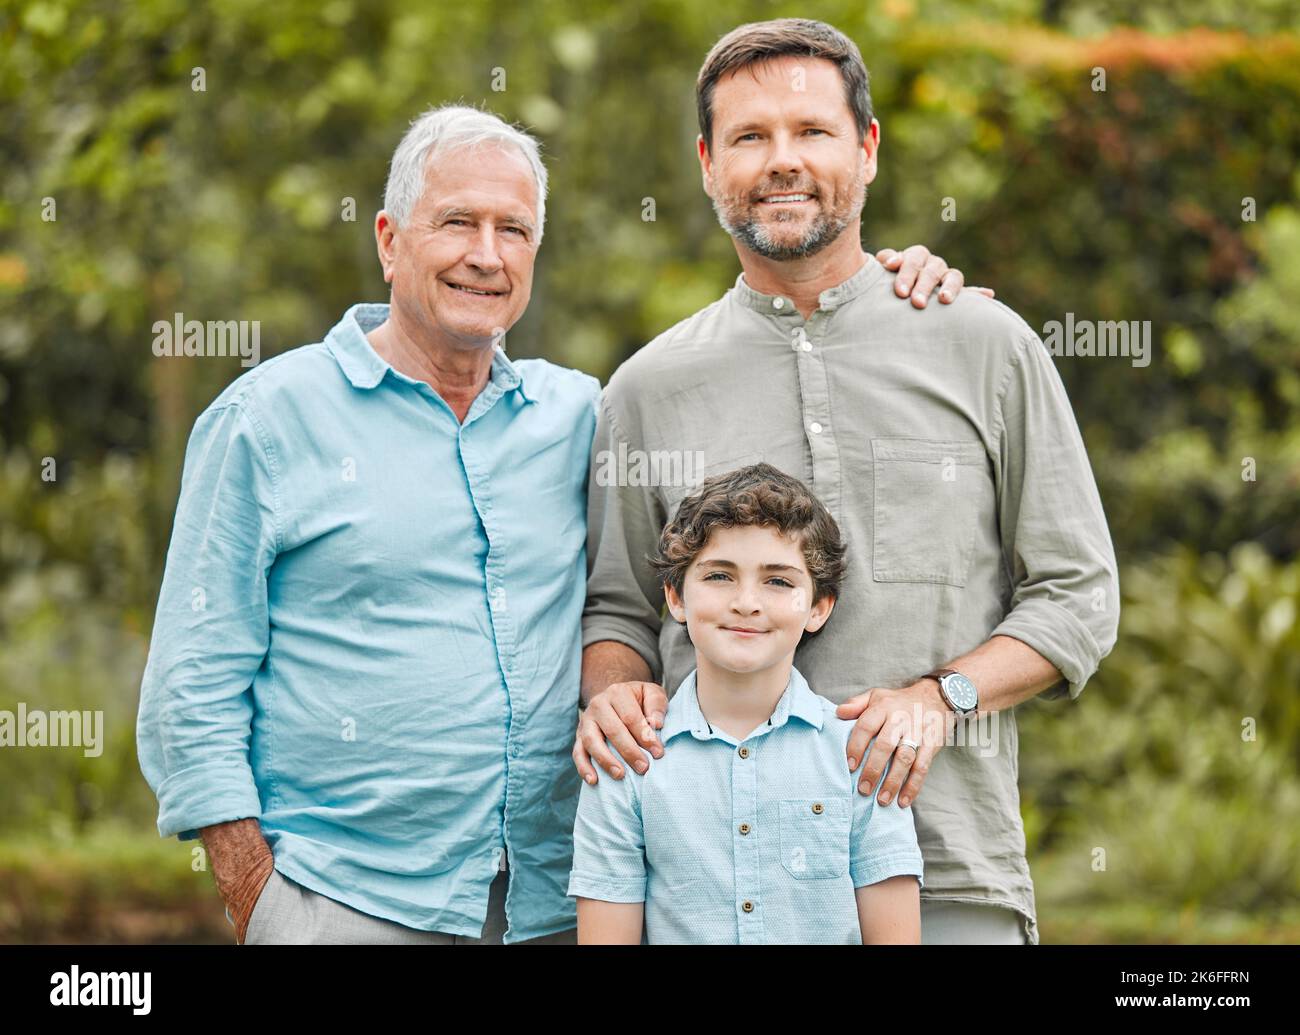 We have little eyes watching and imitating what we do. a boy standing outside with his father and grandfather. Stock Photo